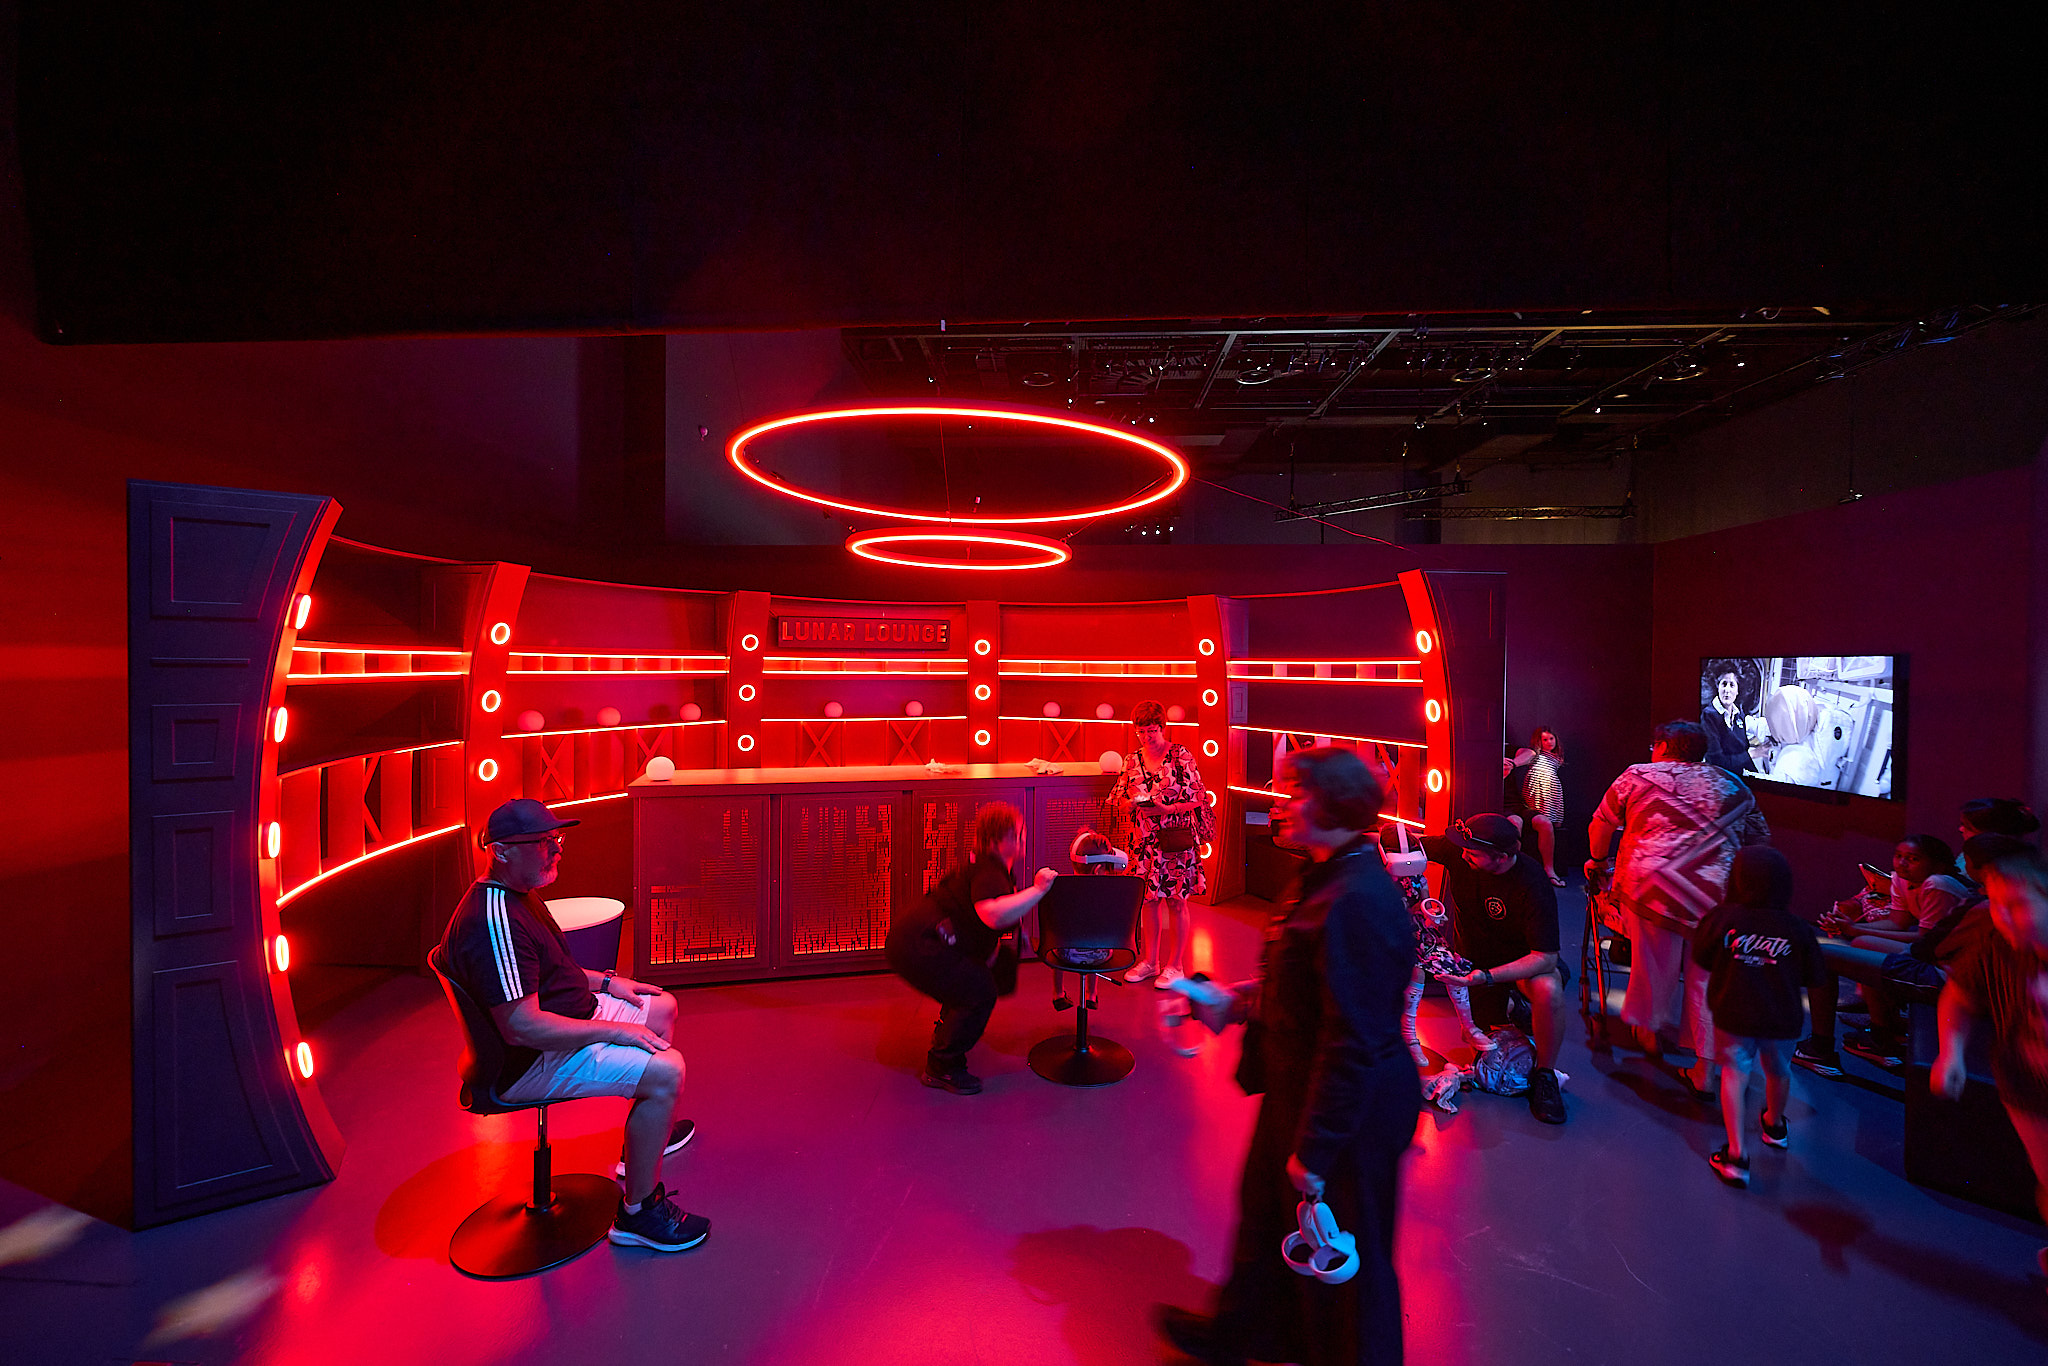 A young child experiencing virtual reality through a headset, holding controllers in a red lit room. 